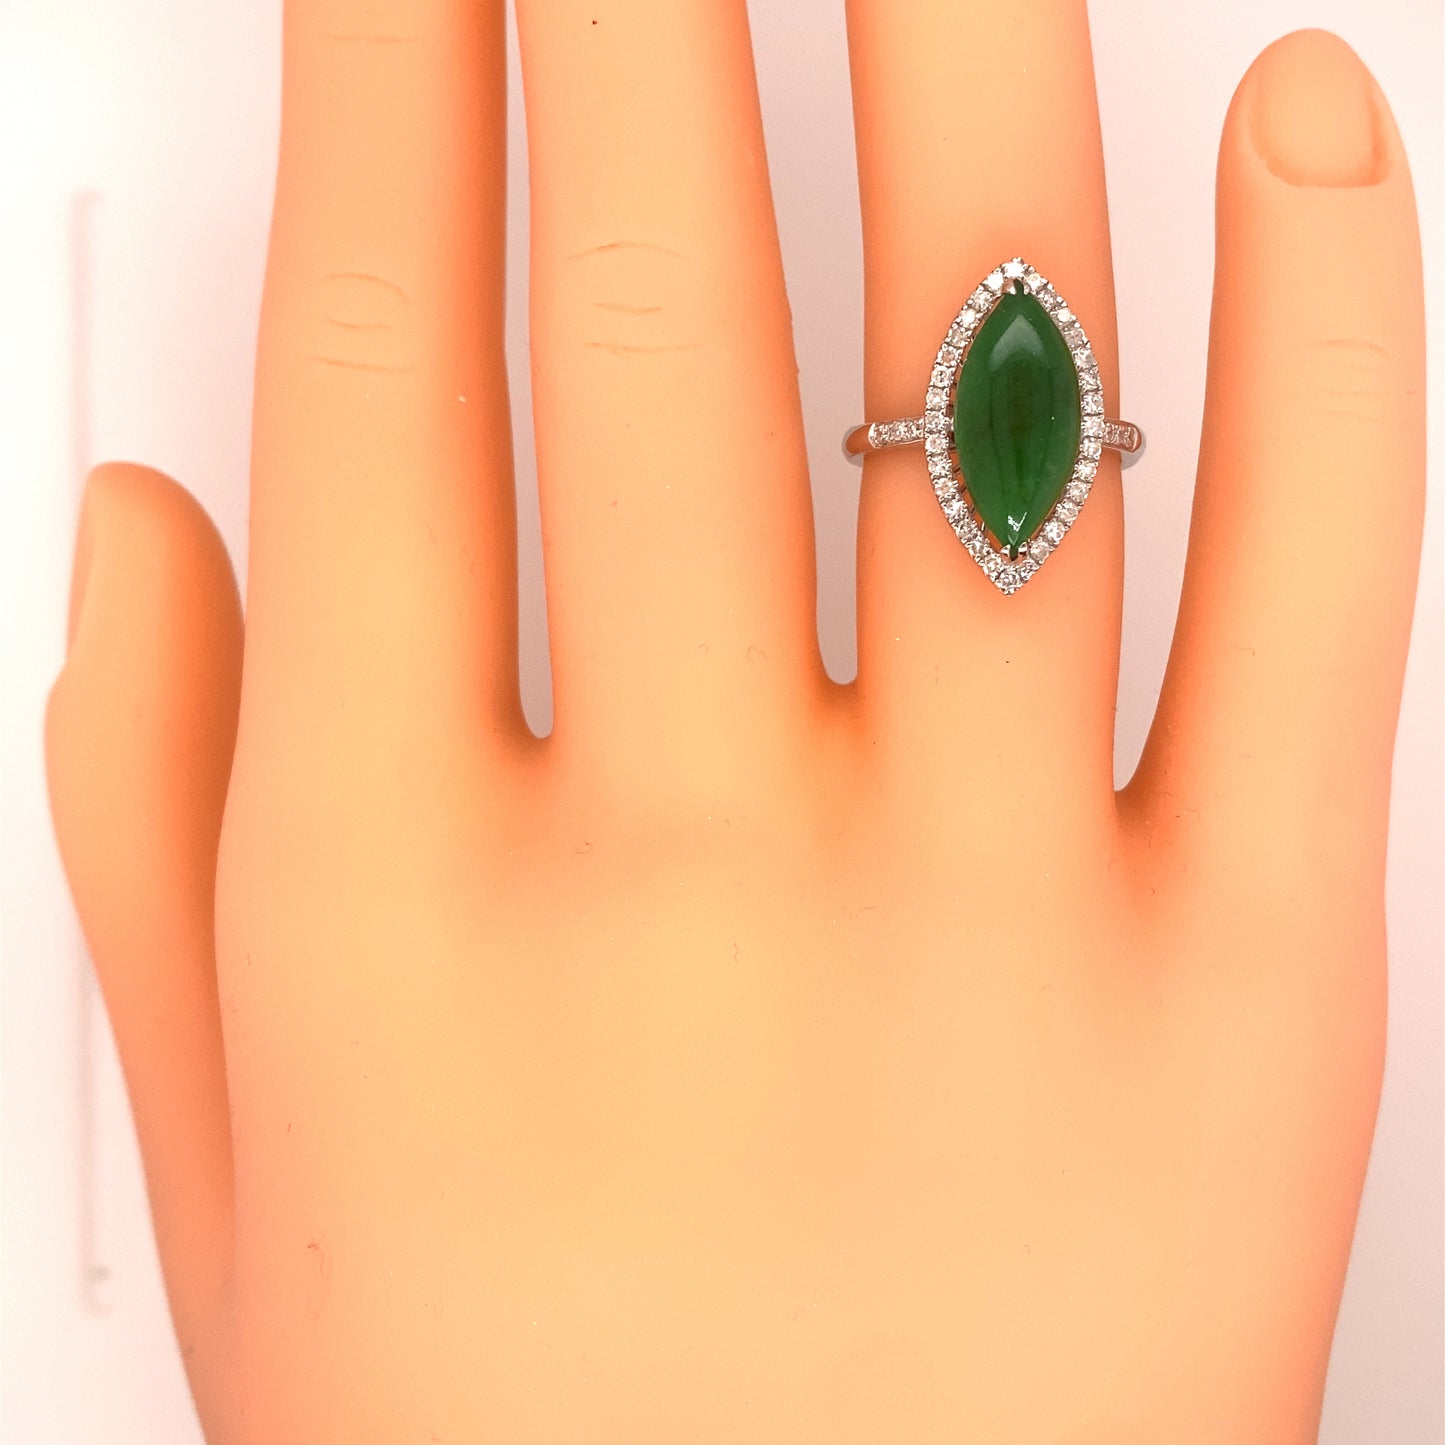 Italian Marquise Jade and Diamond Halo Ring in 18K White Gold